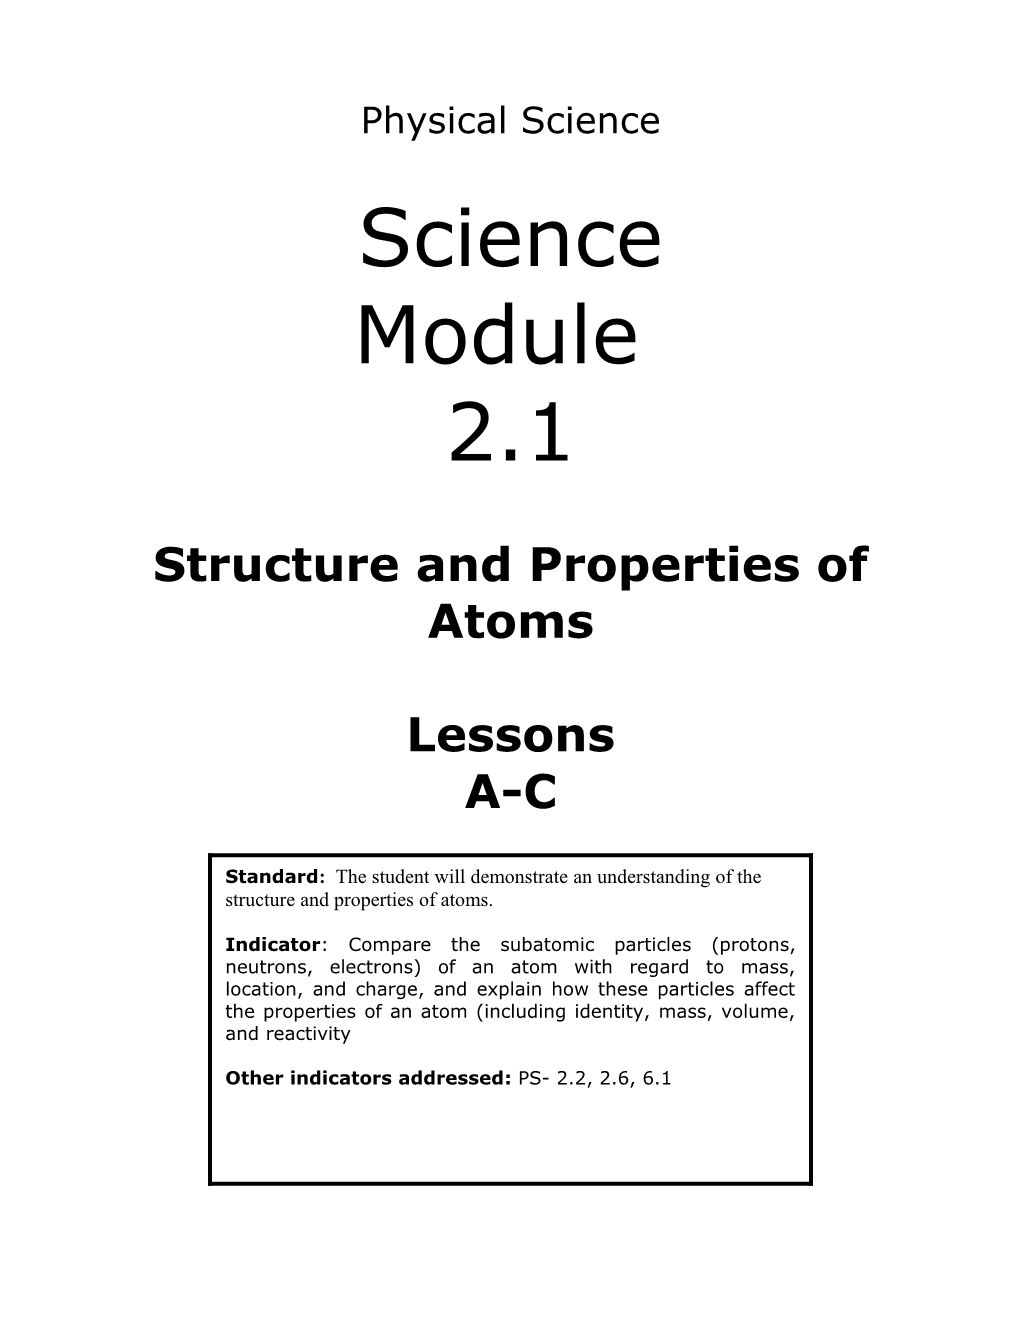 Structure and Properties of Atoms